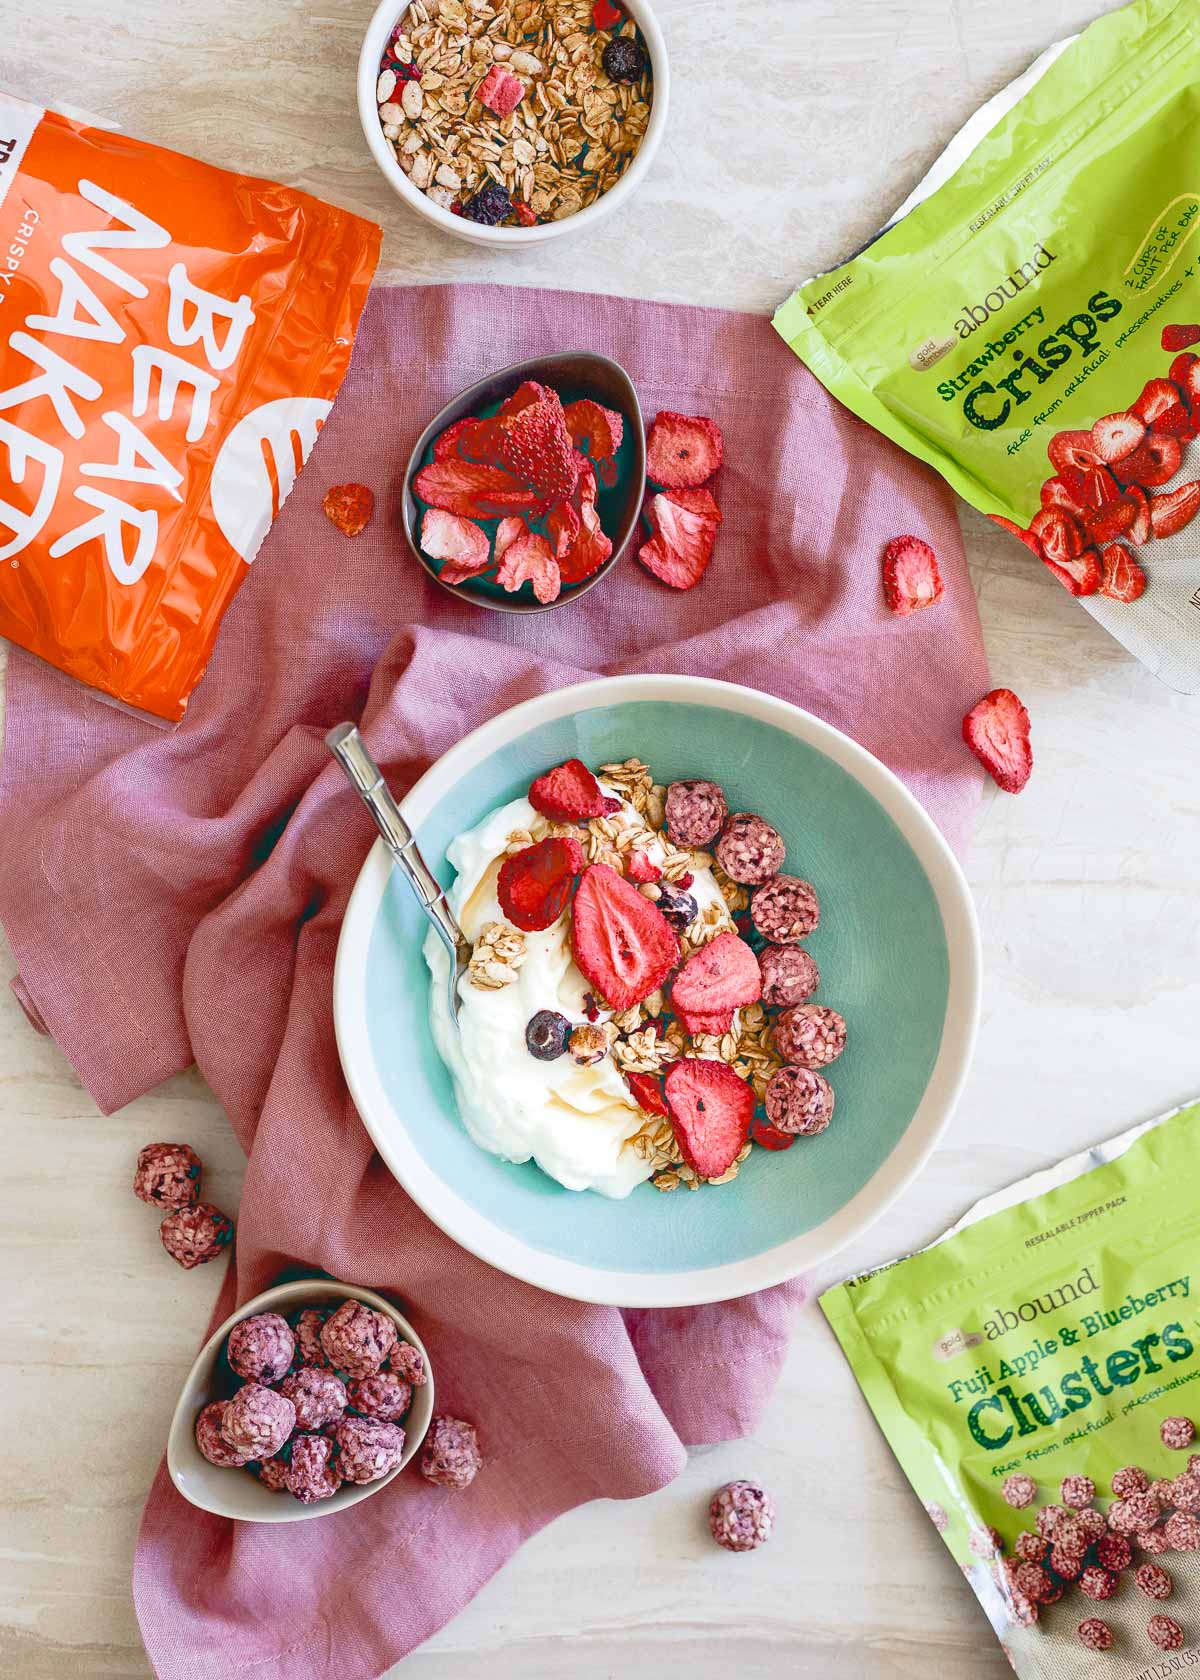 Greek yogurt, freeze dried fruit and granola are a simple and easy idea for a healthy afternoon snack to satisfy any sweet craving.